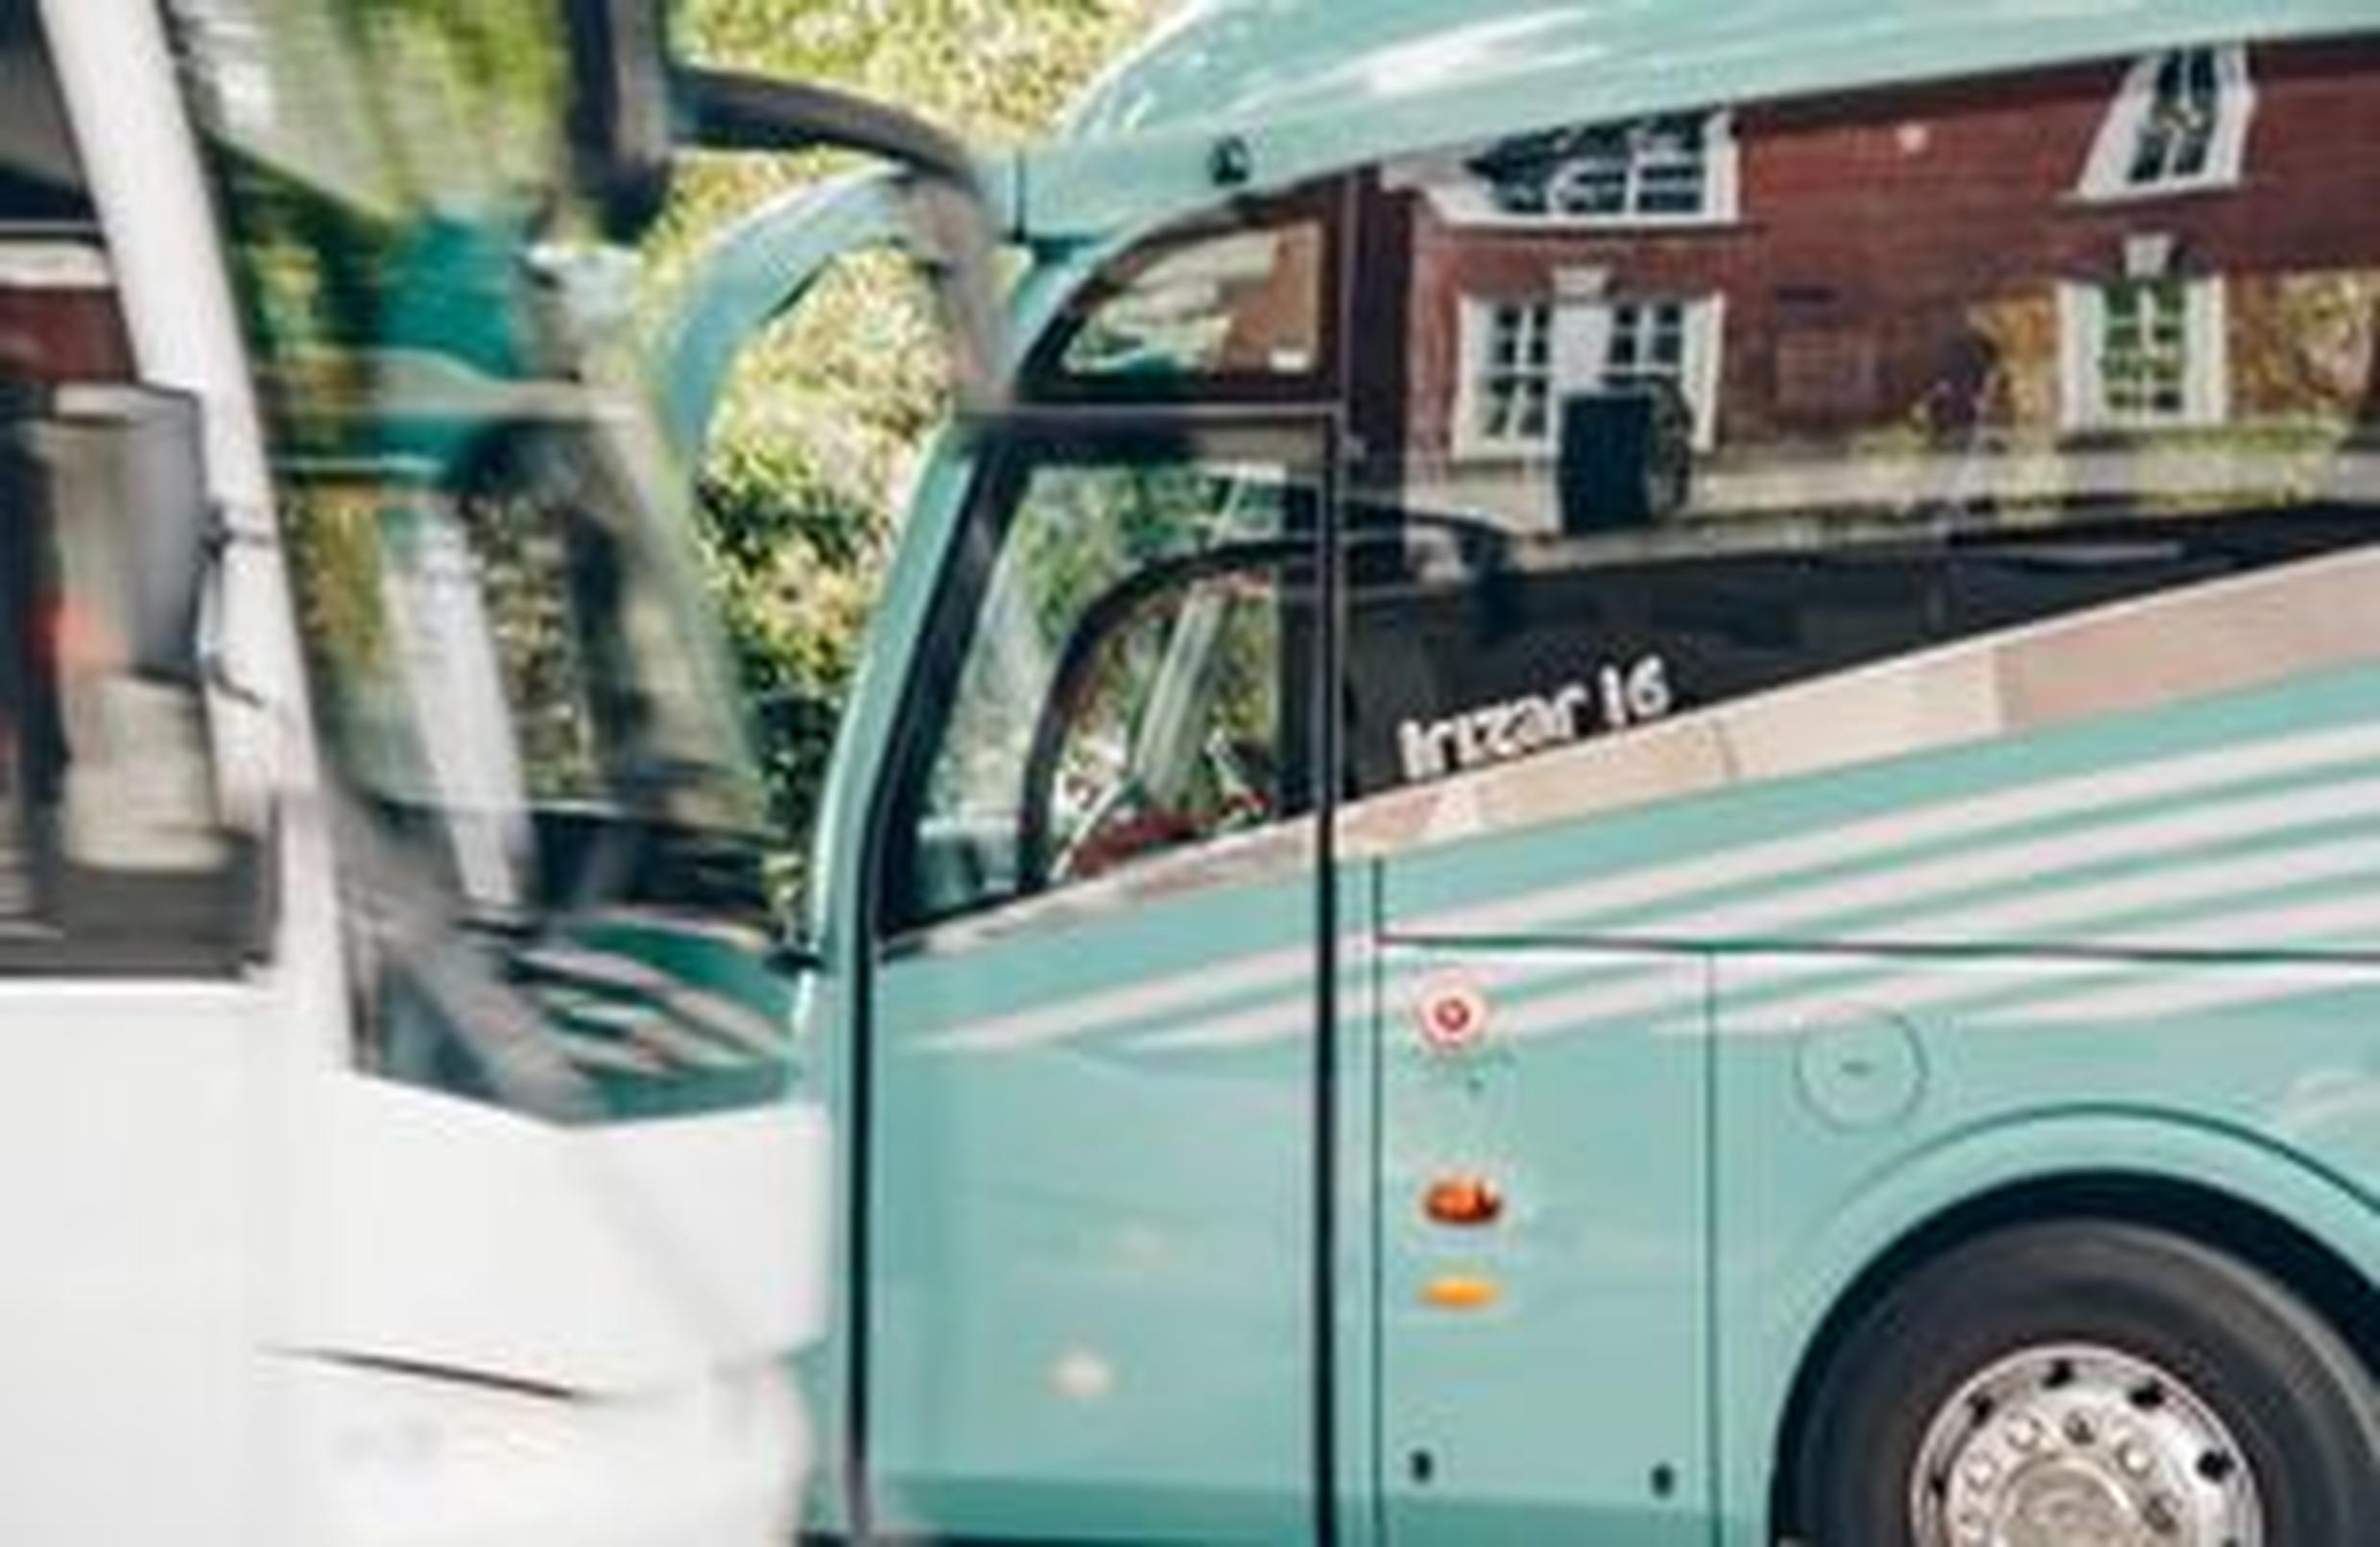 The DfT funding will enable scheduled coach operators to boost services to up to 75% of pre-pandemic services